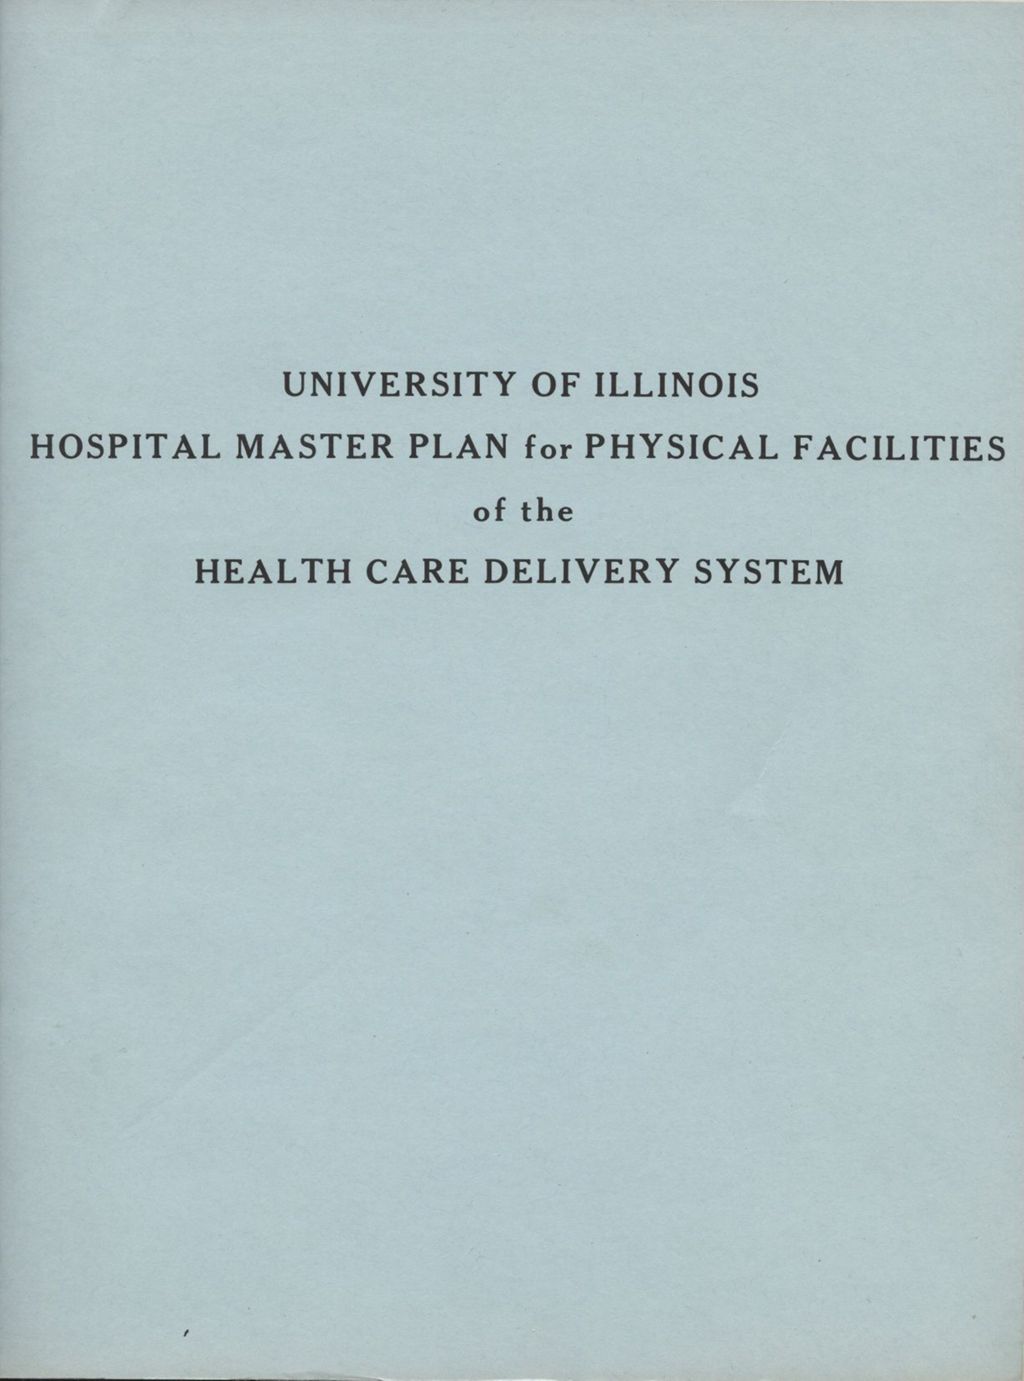 University of Illinois Hospital Master Plan for Physical Facilities of the Health Care Delivery System